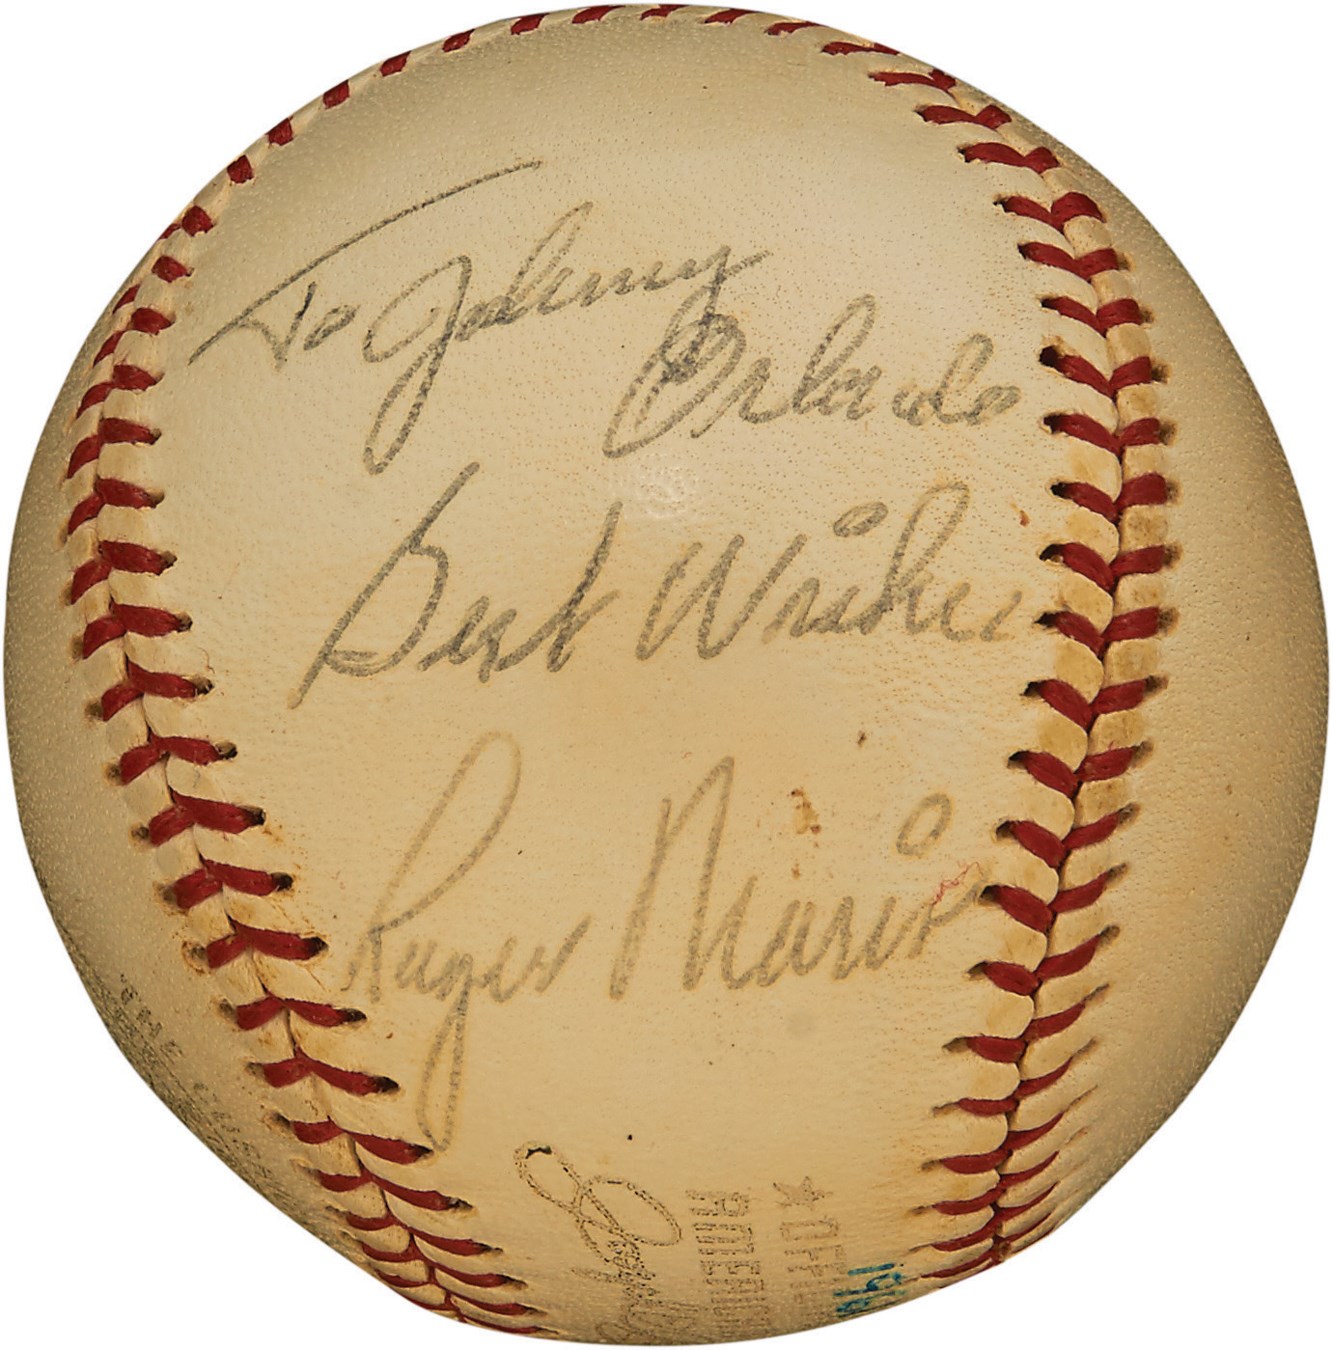 - 1961 Roger Maris Signed Inscribed Baseball to Red Sox Equipment Manager (PSA)